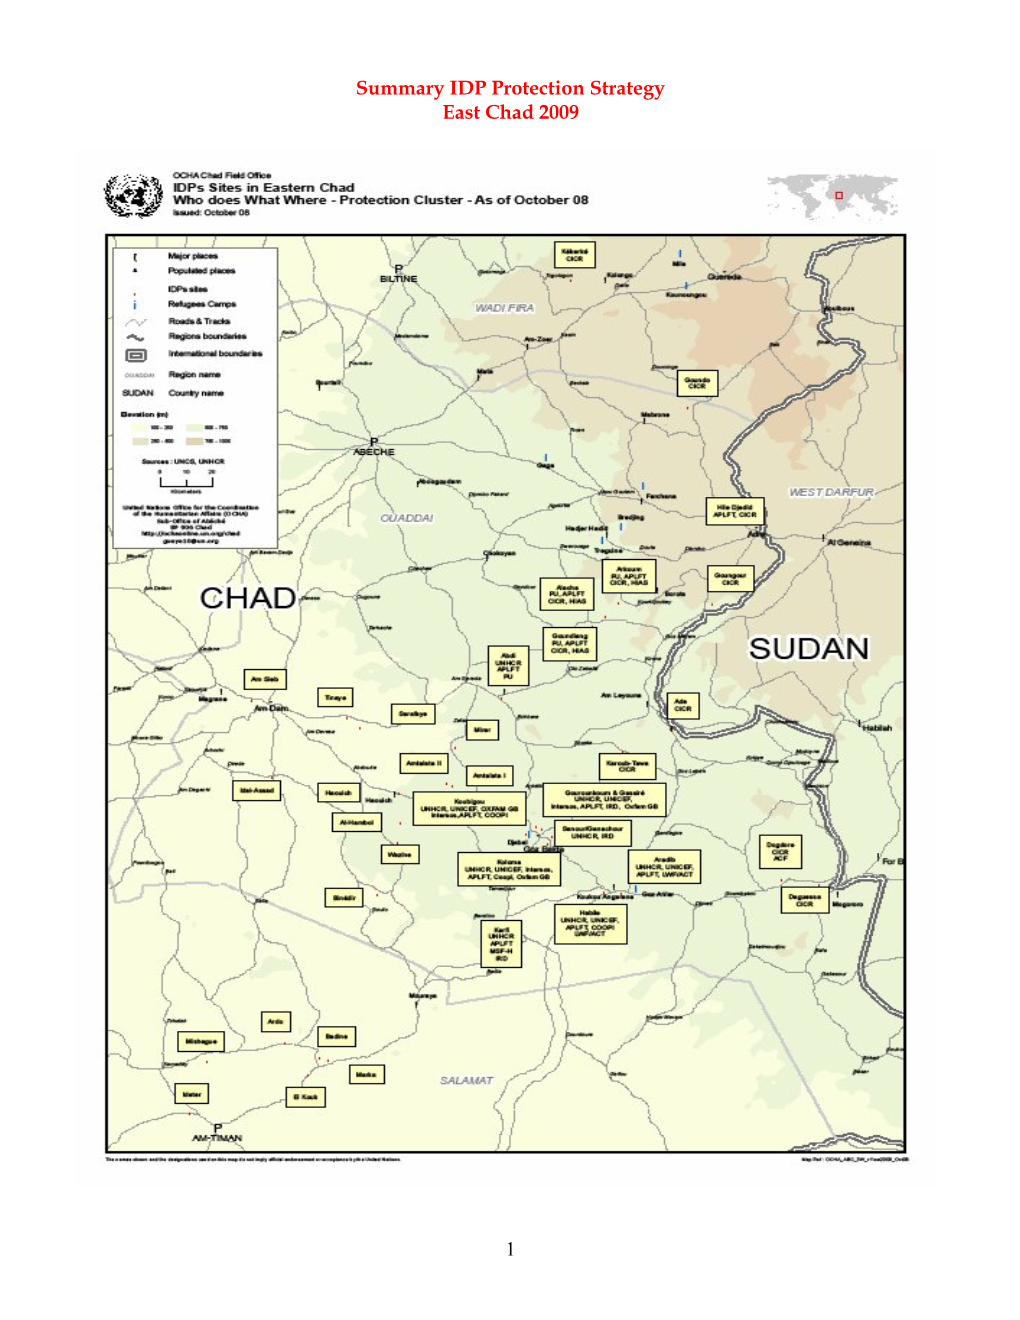 1 Summary IDP Protection Strategy East Chad 2009